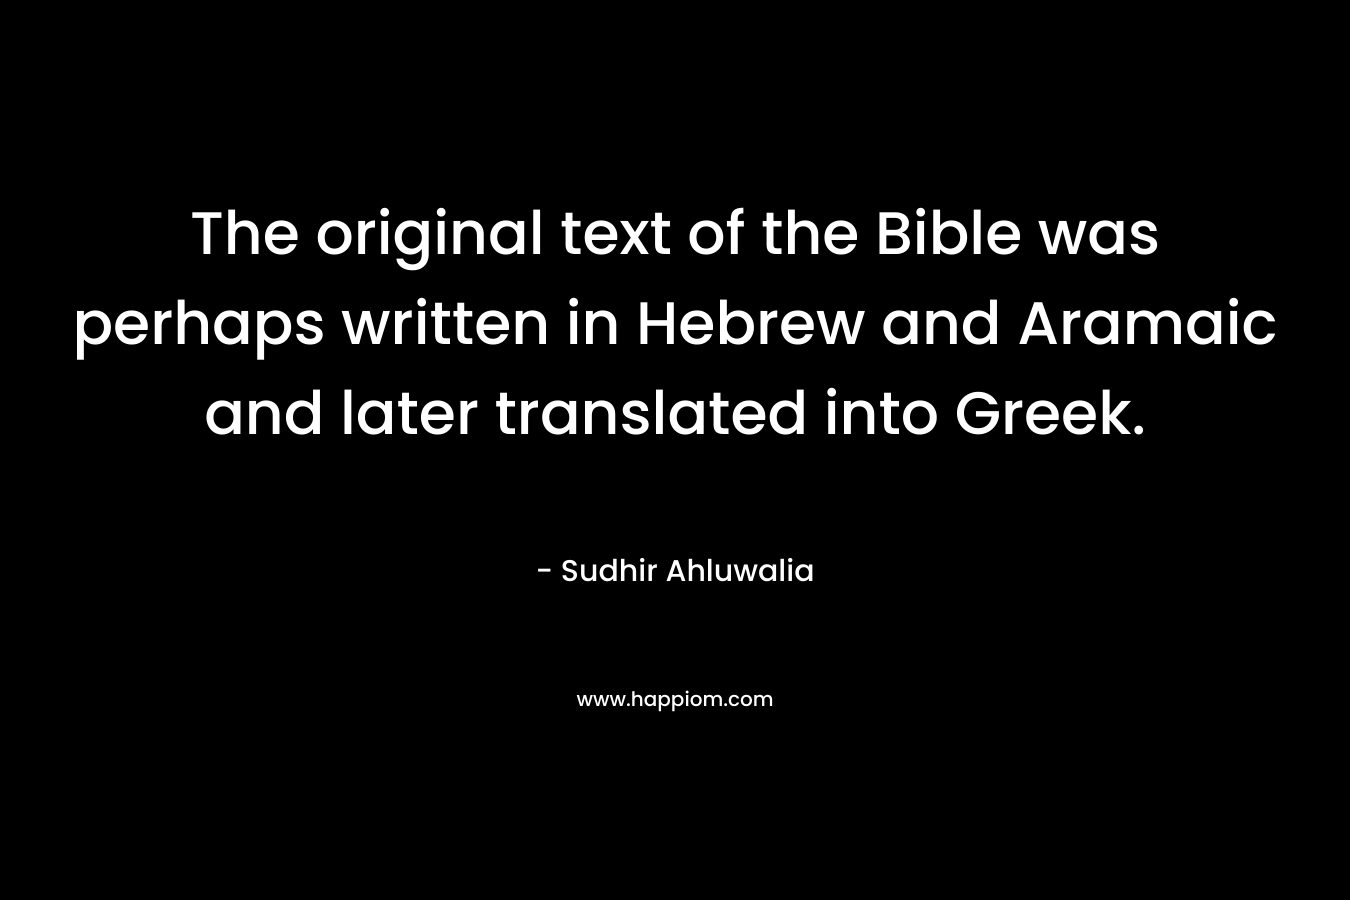 The original text of the Bible was perhaps written in Hebrew and Aramaic and later translated into Greek.